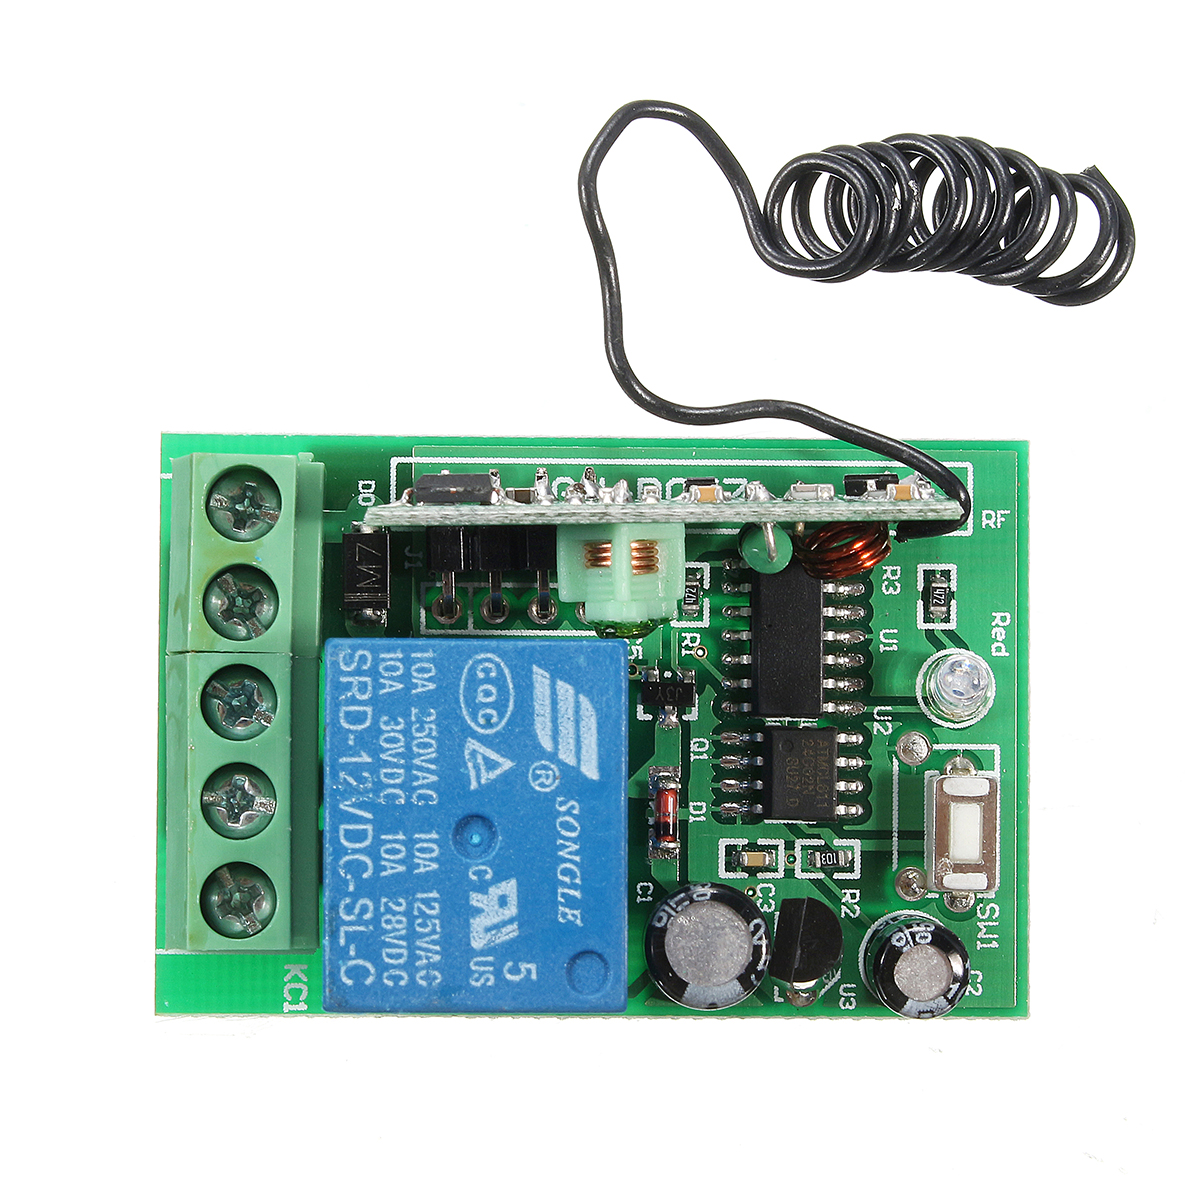 DC-12V-10A-Realy-1CH-Wireless-RF-Remote-Control-Switch-with-Transmitter--Receiver-1001267